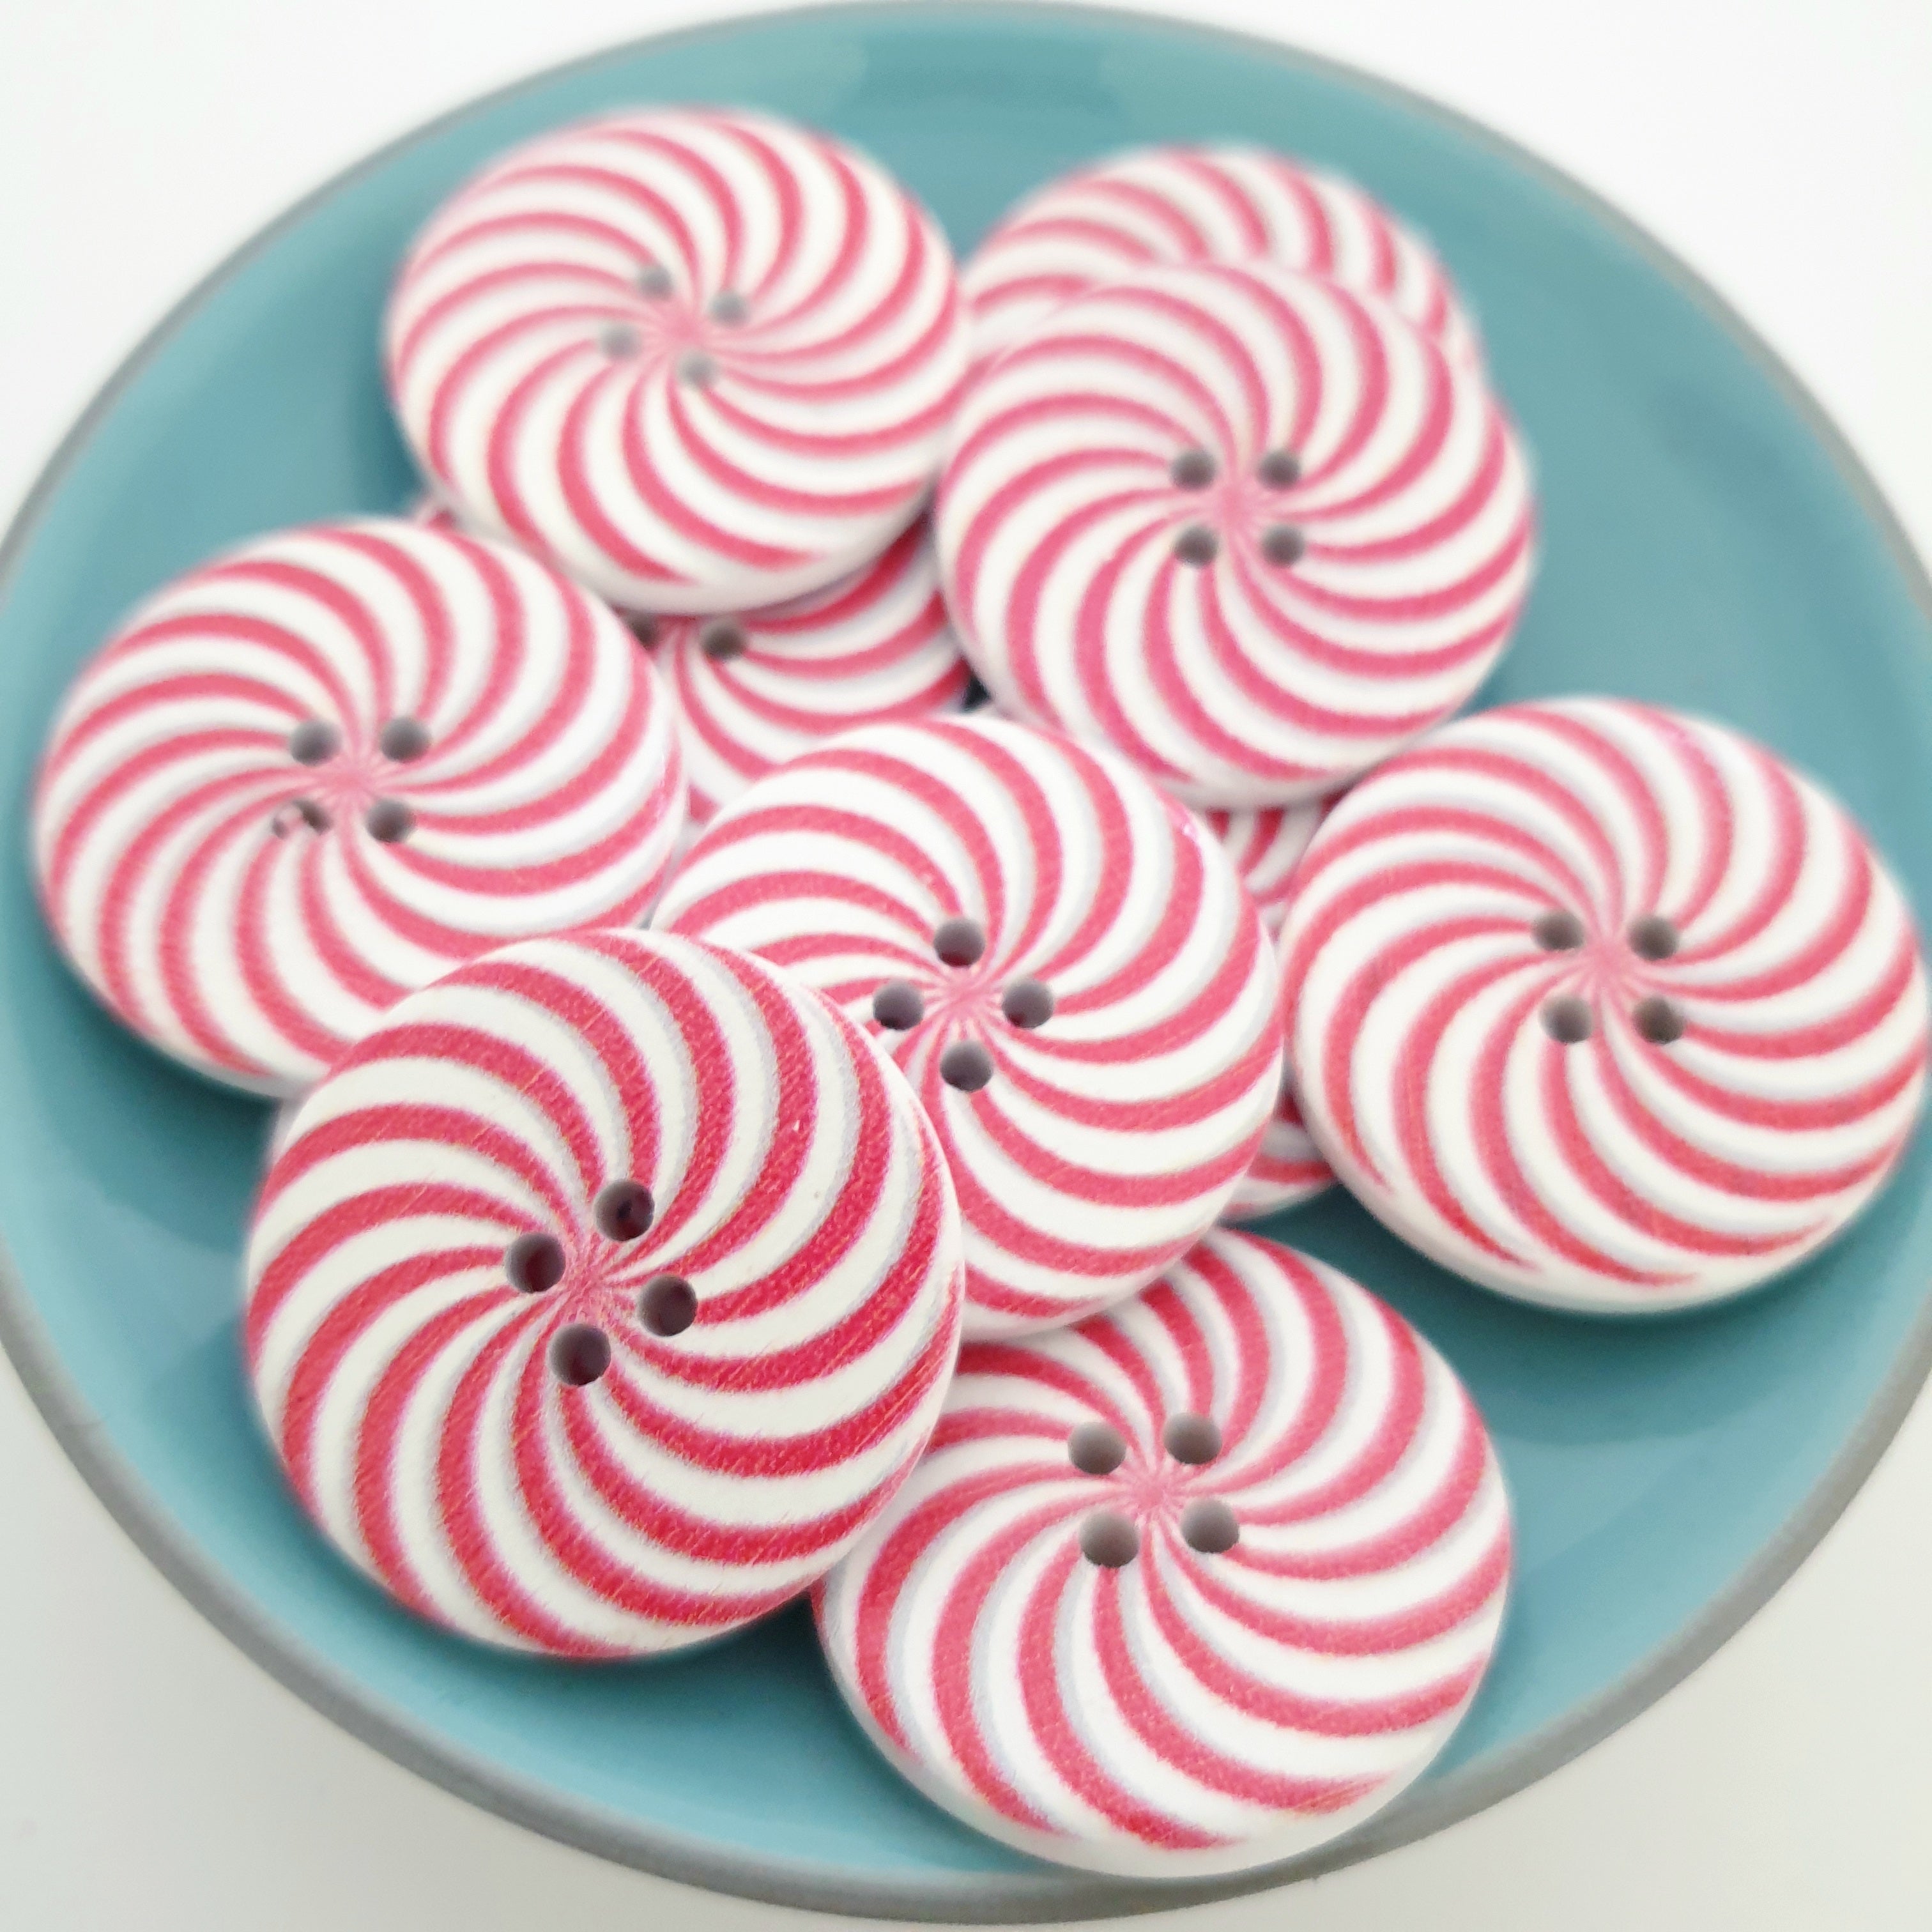 MajorCrafts 16pcs 30mm Red & White Spiral Pattern 4 Holes Large Wooden Sewing Buttons